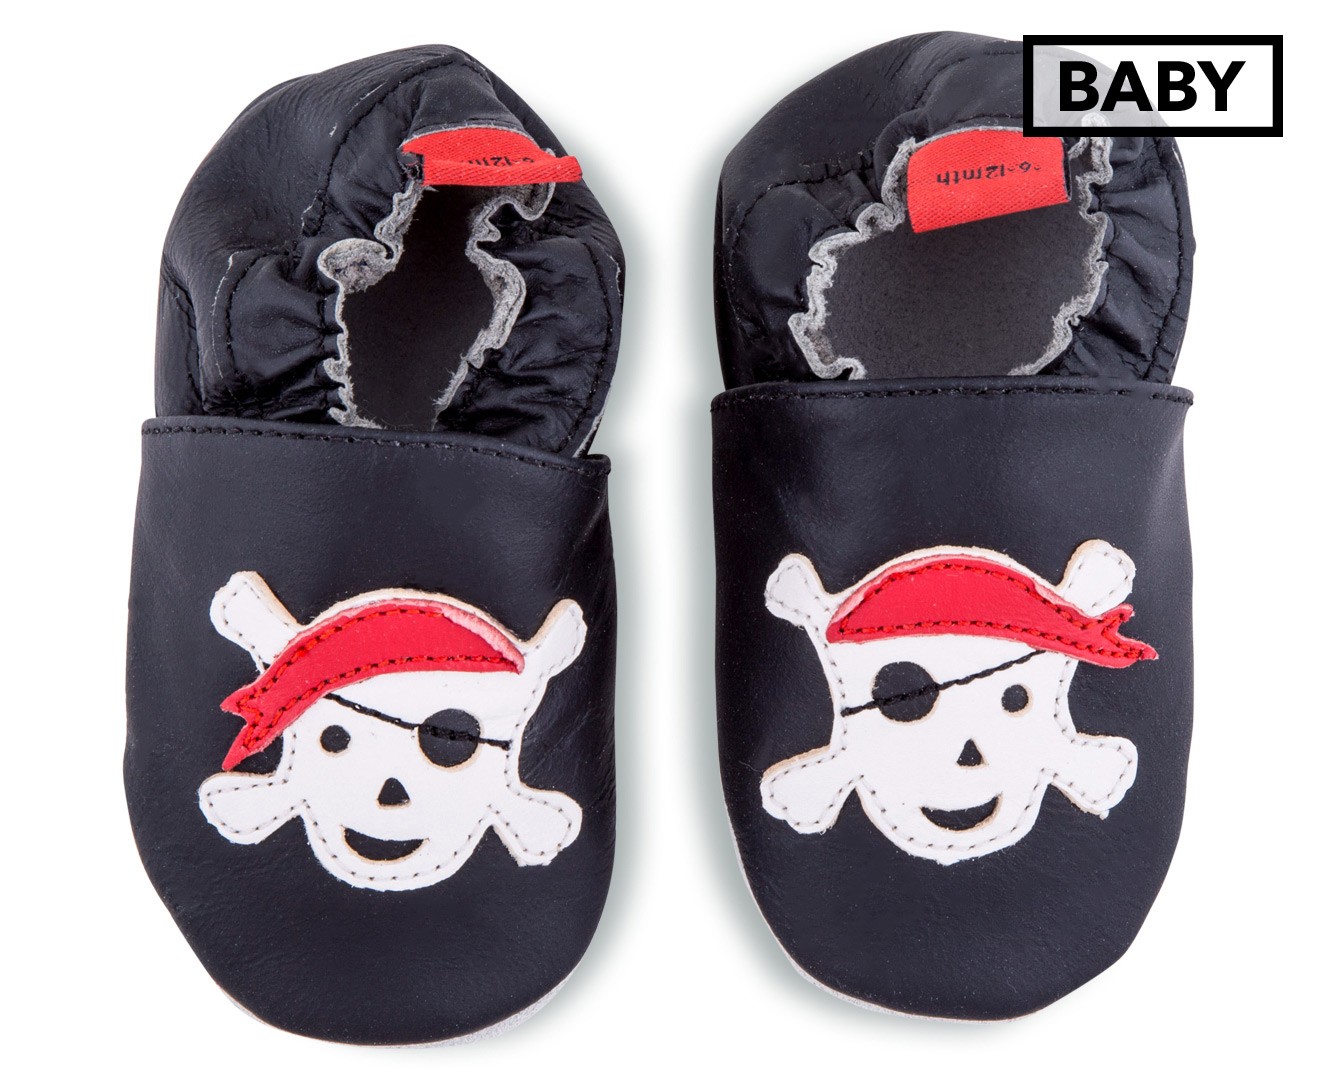 Angel Fit Baby Pirate Shoes - Black